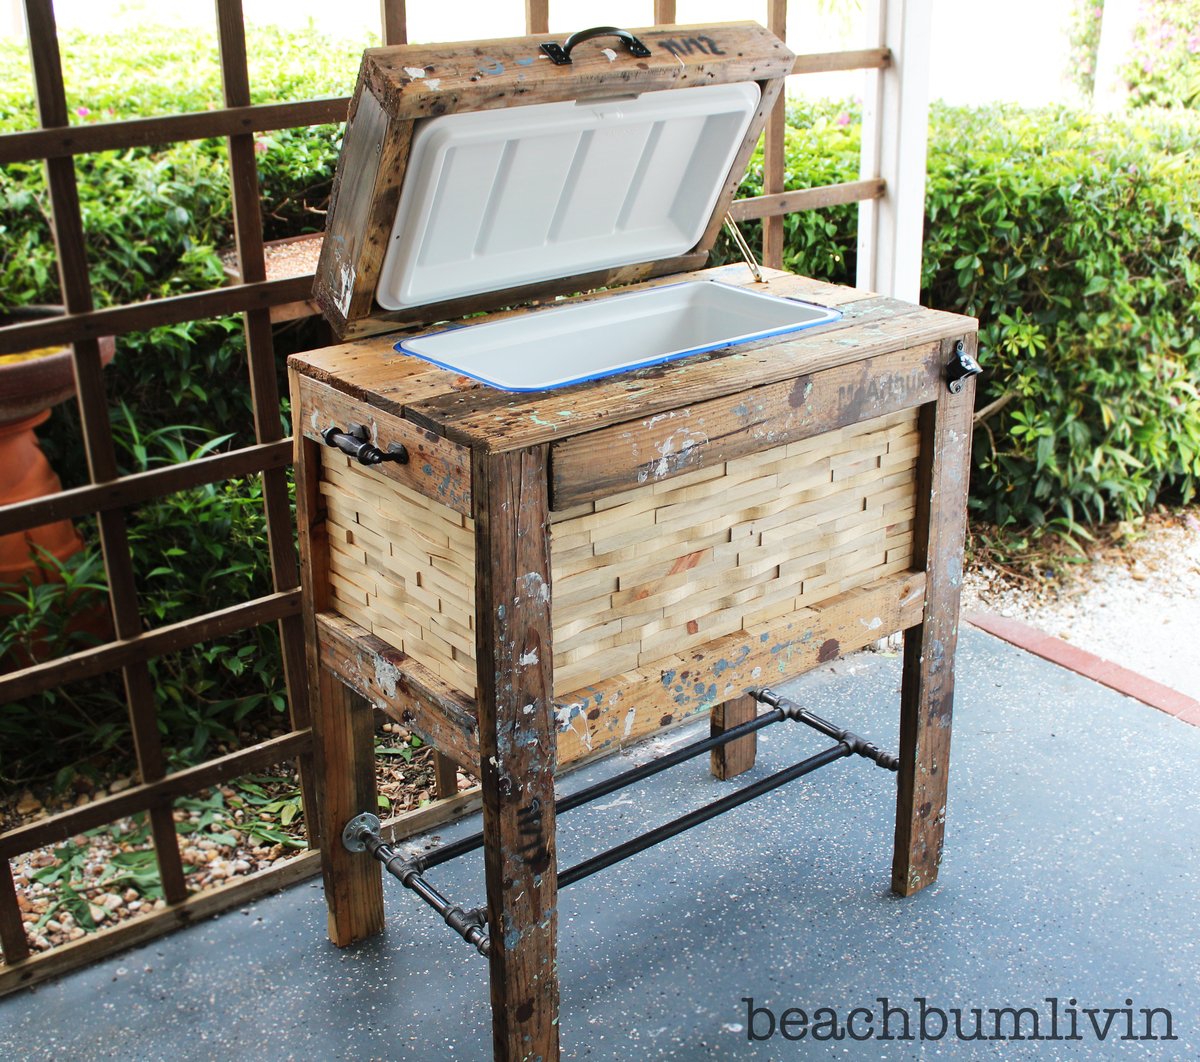 Rustic Wood Cooler Box made from Pallets! | Do It Yourself Home ...